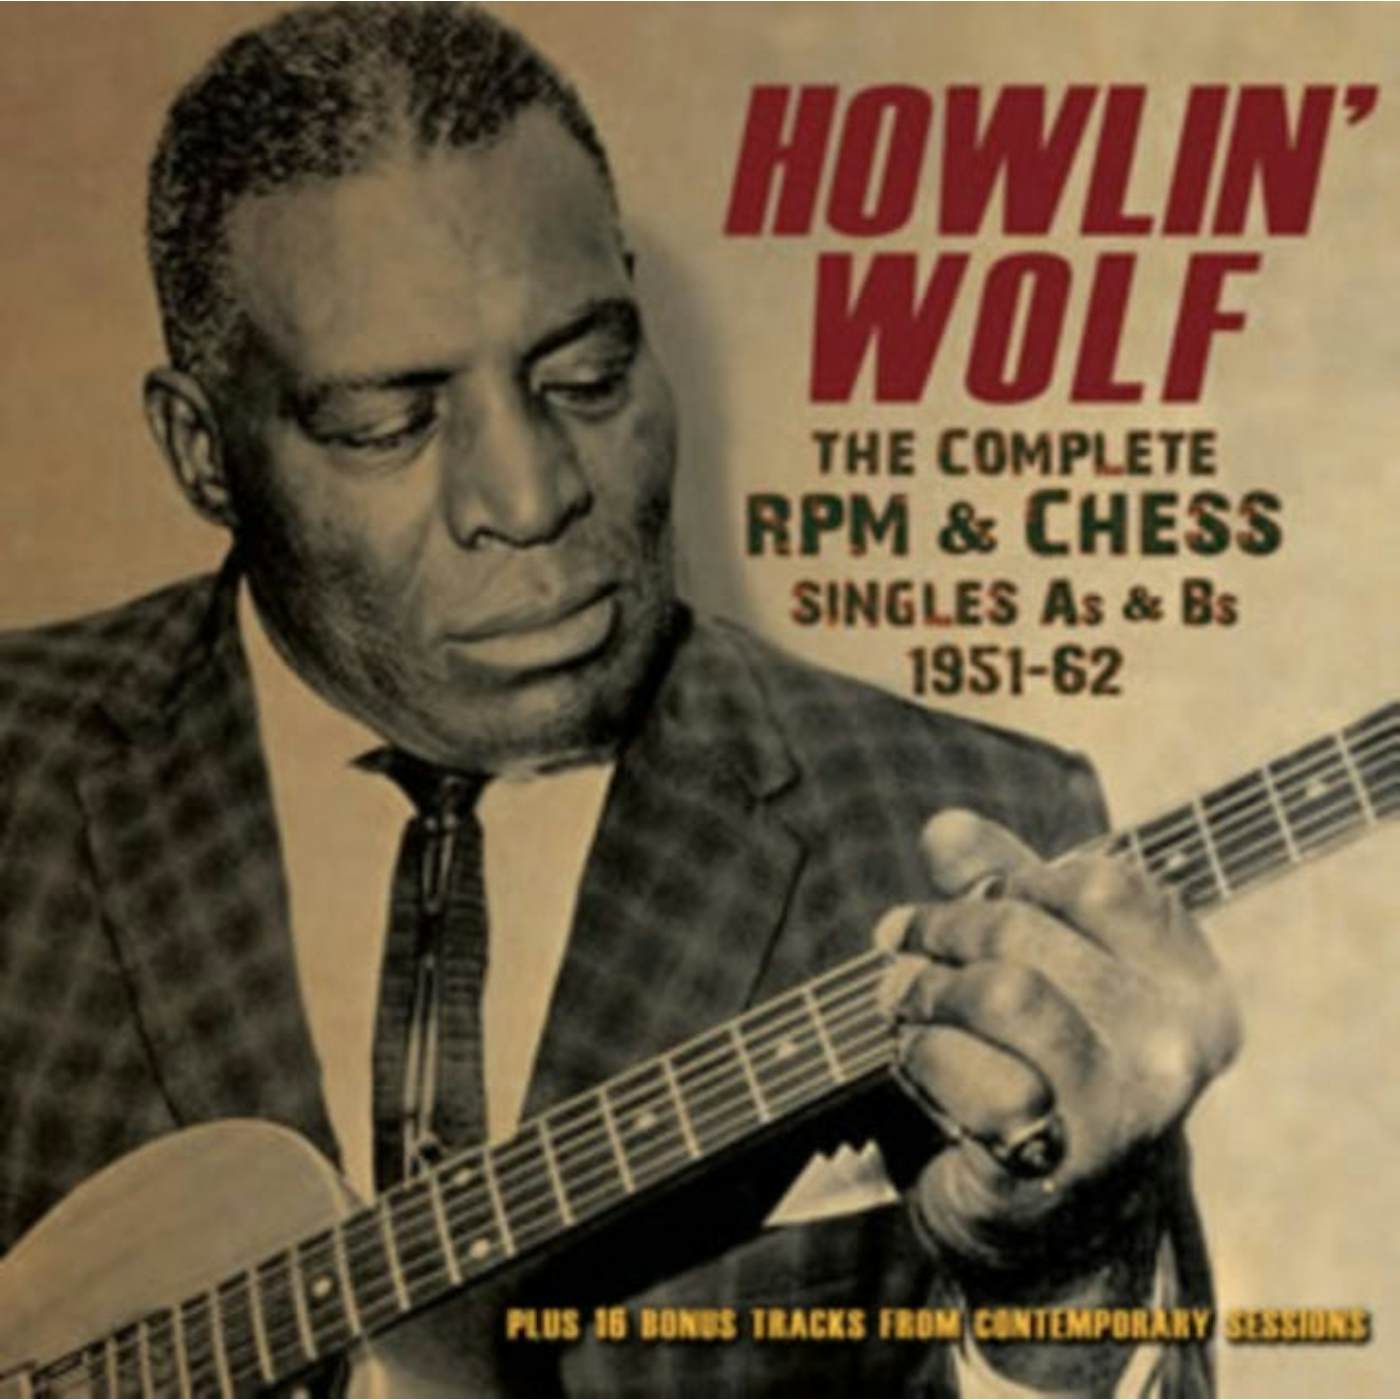 Howlin' Wolf CD - The Complete Rpm & Chess Singles